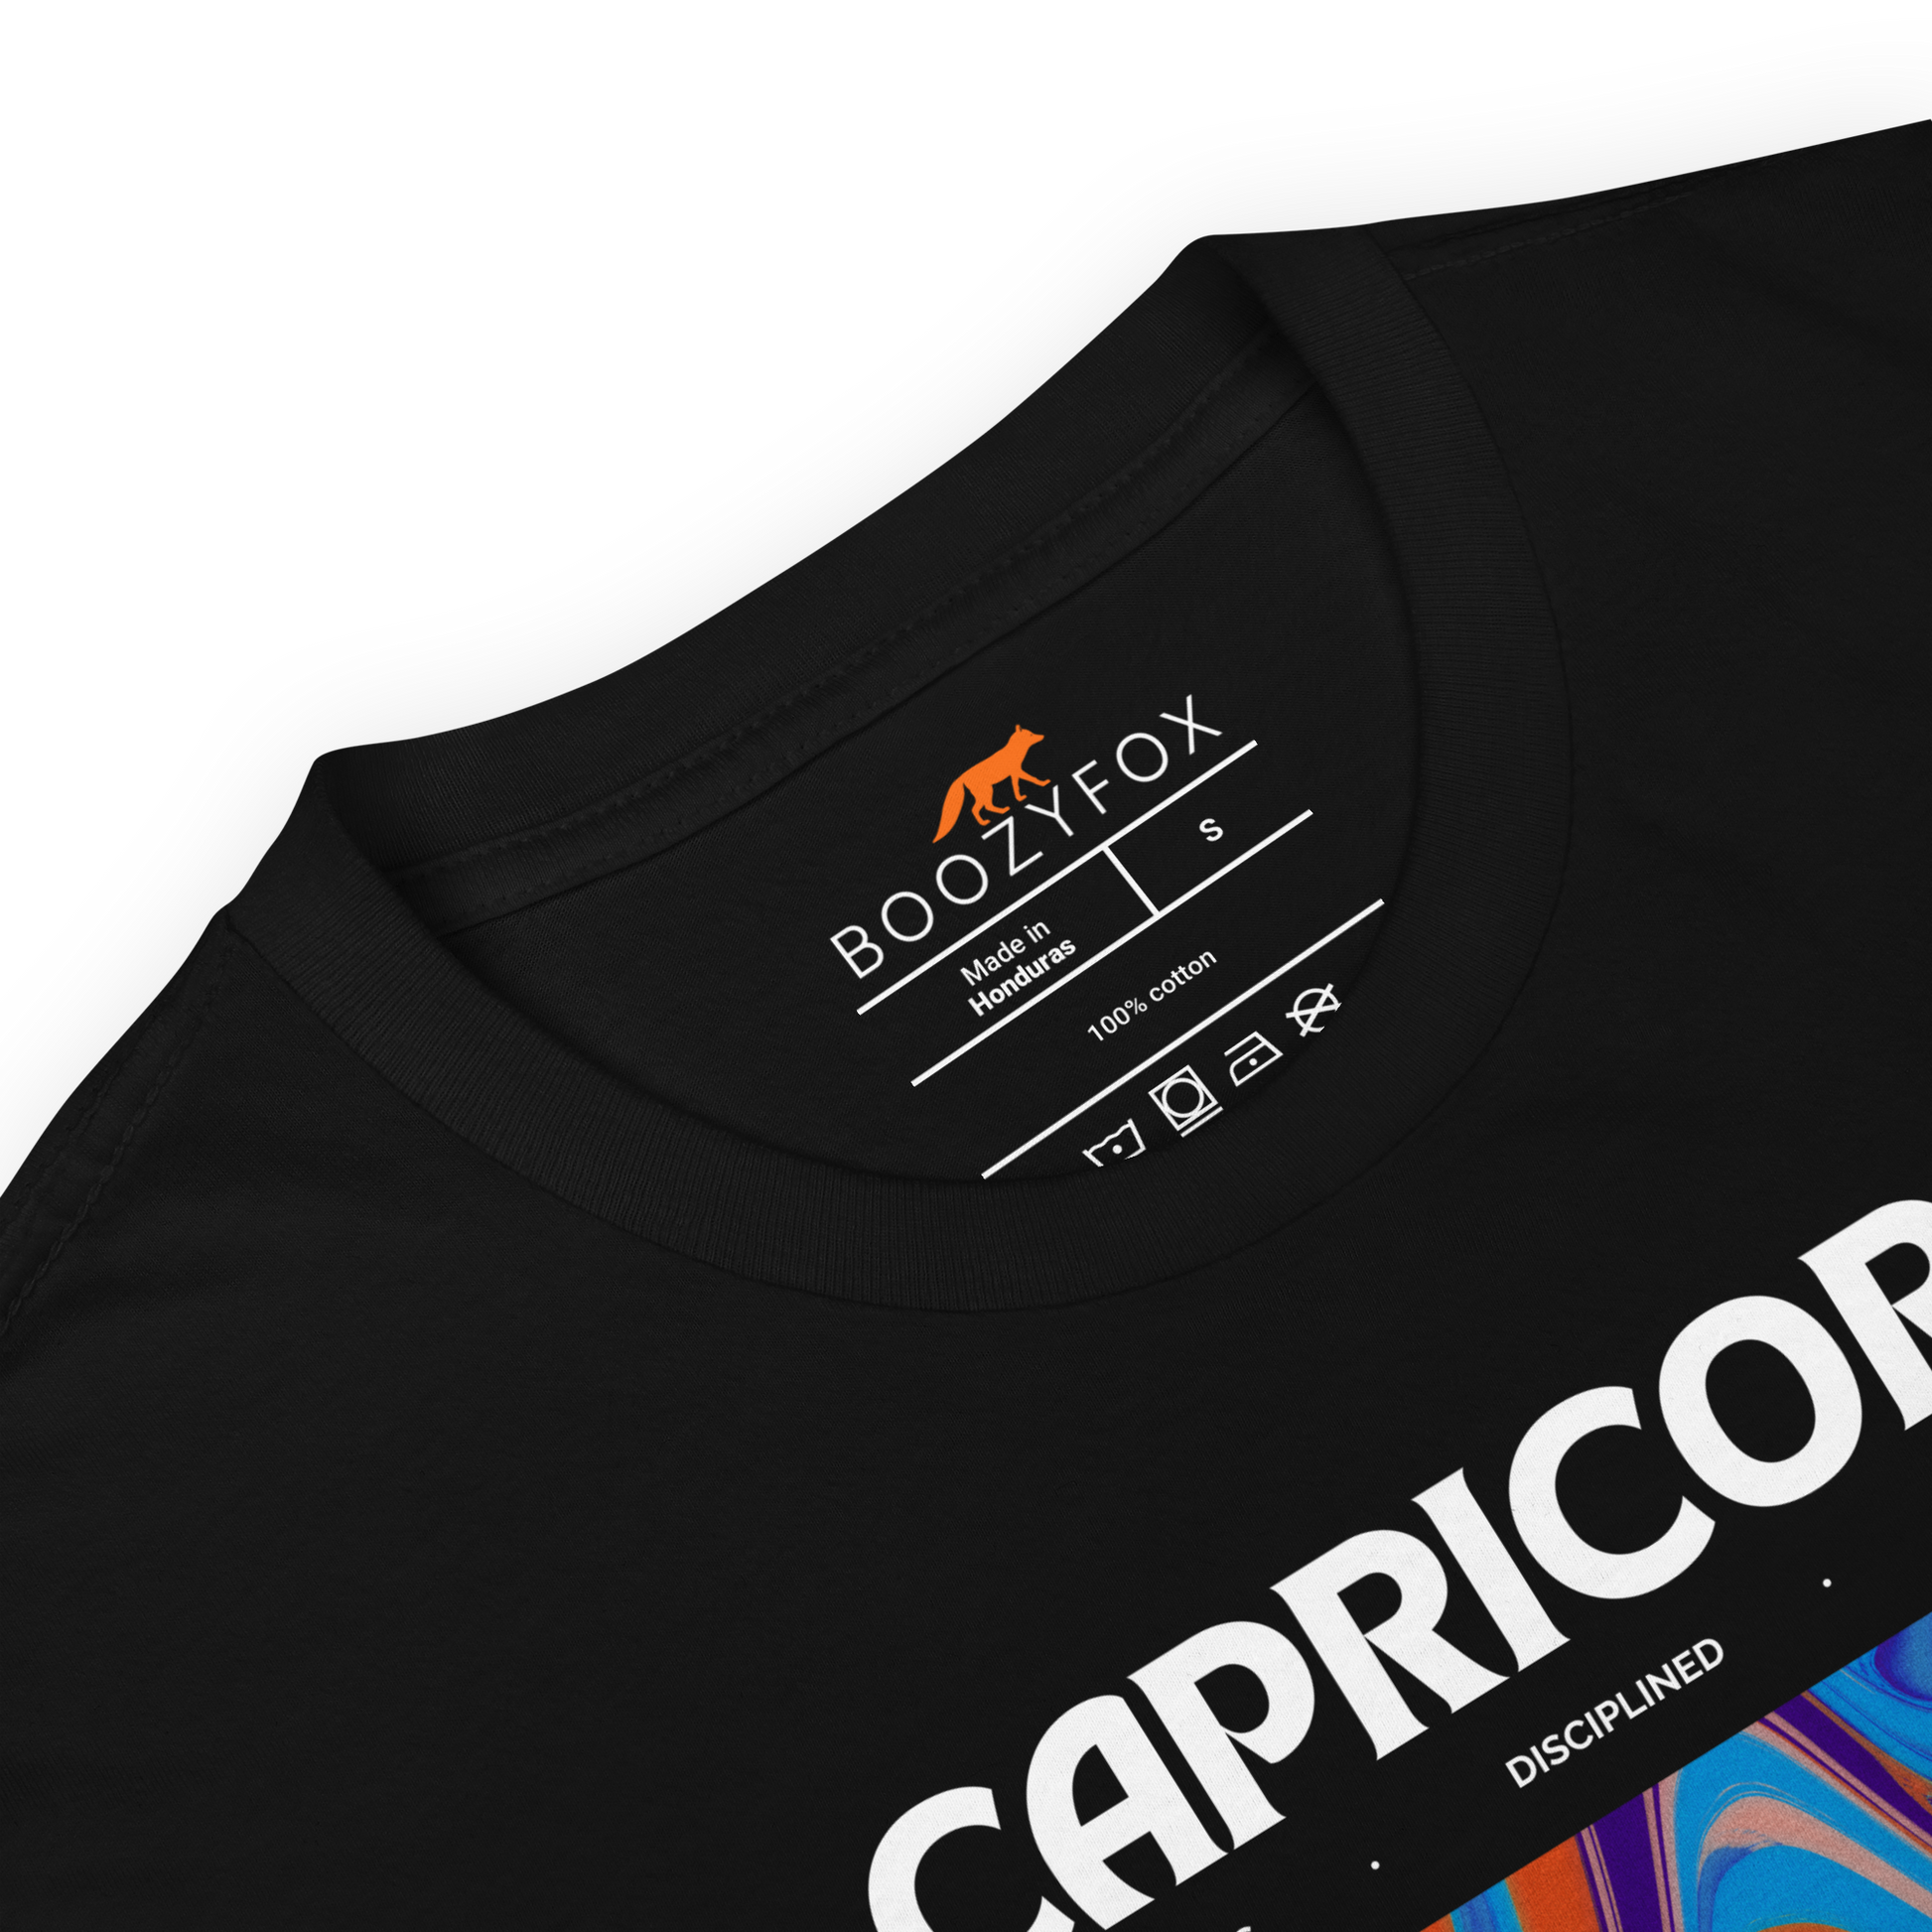 Product details of a Black Capricorn T-Shirt featuring an Abstract Capricorn Star Sign graphic on the chest - Cool Graphic Zodiac T-Shirts - Boozy Fox